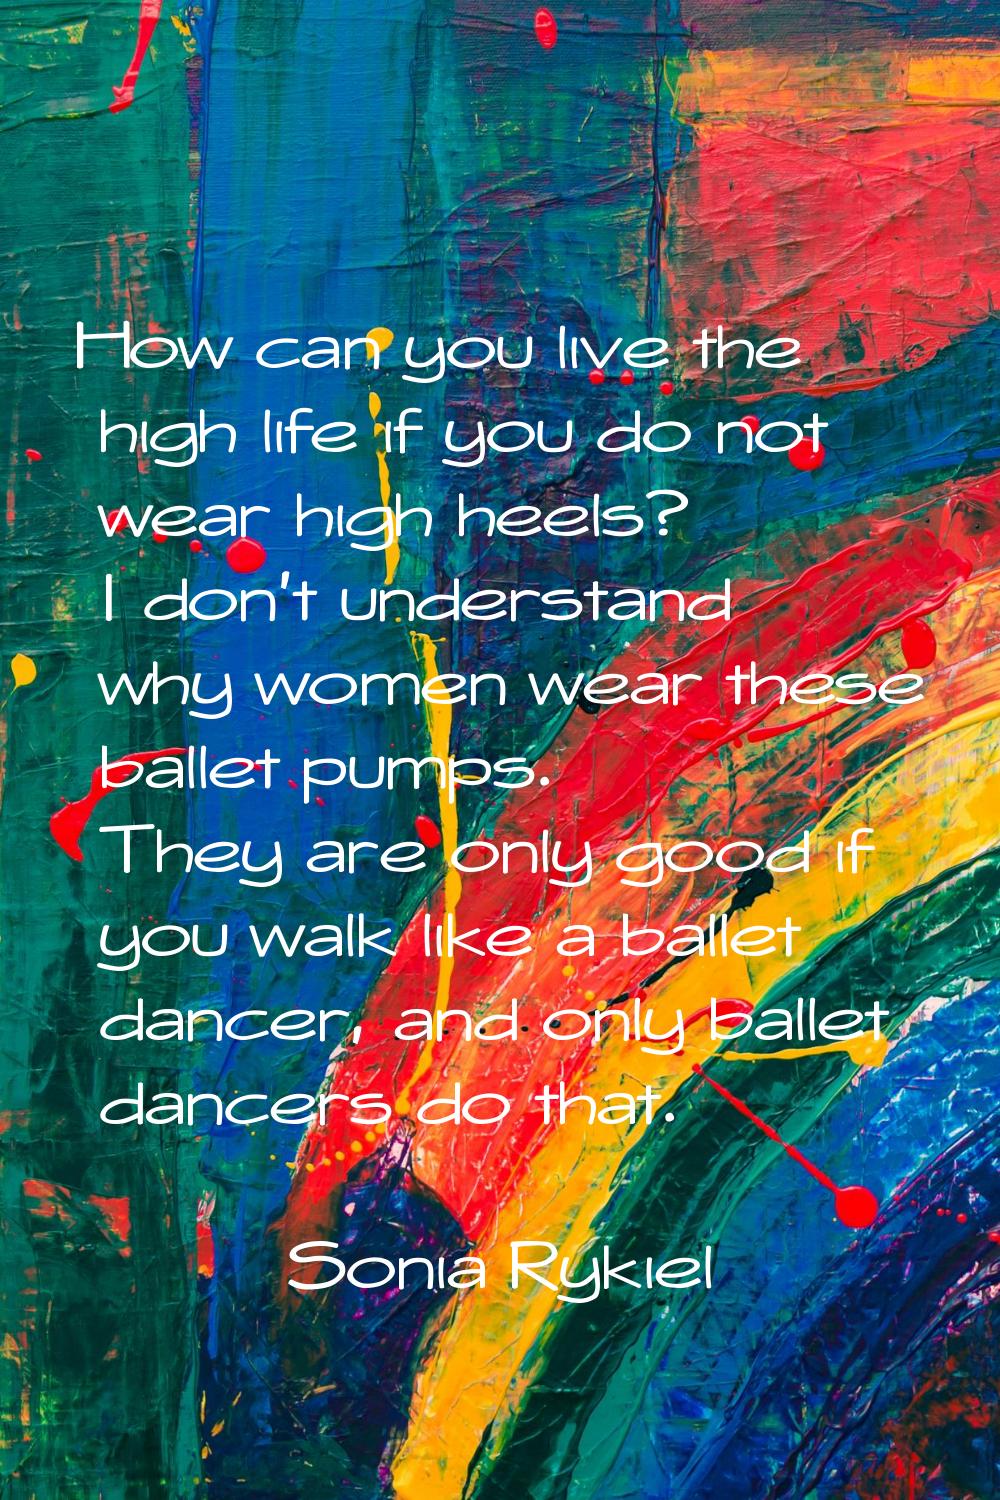 How can you live the high life if you do not wear high heels? I don't understand why women wear the